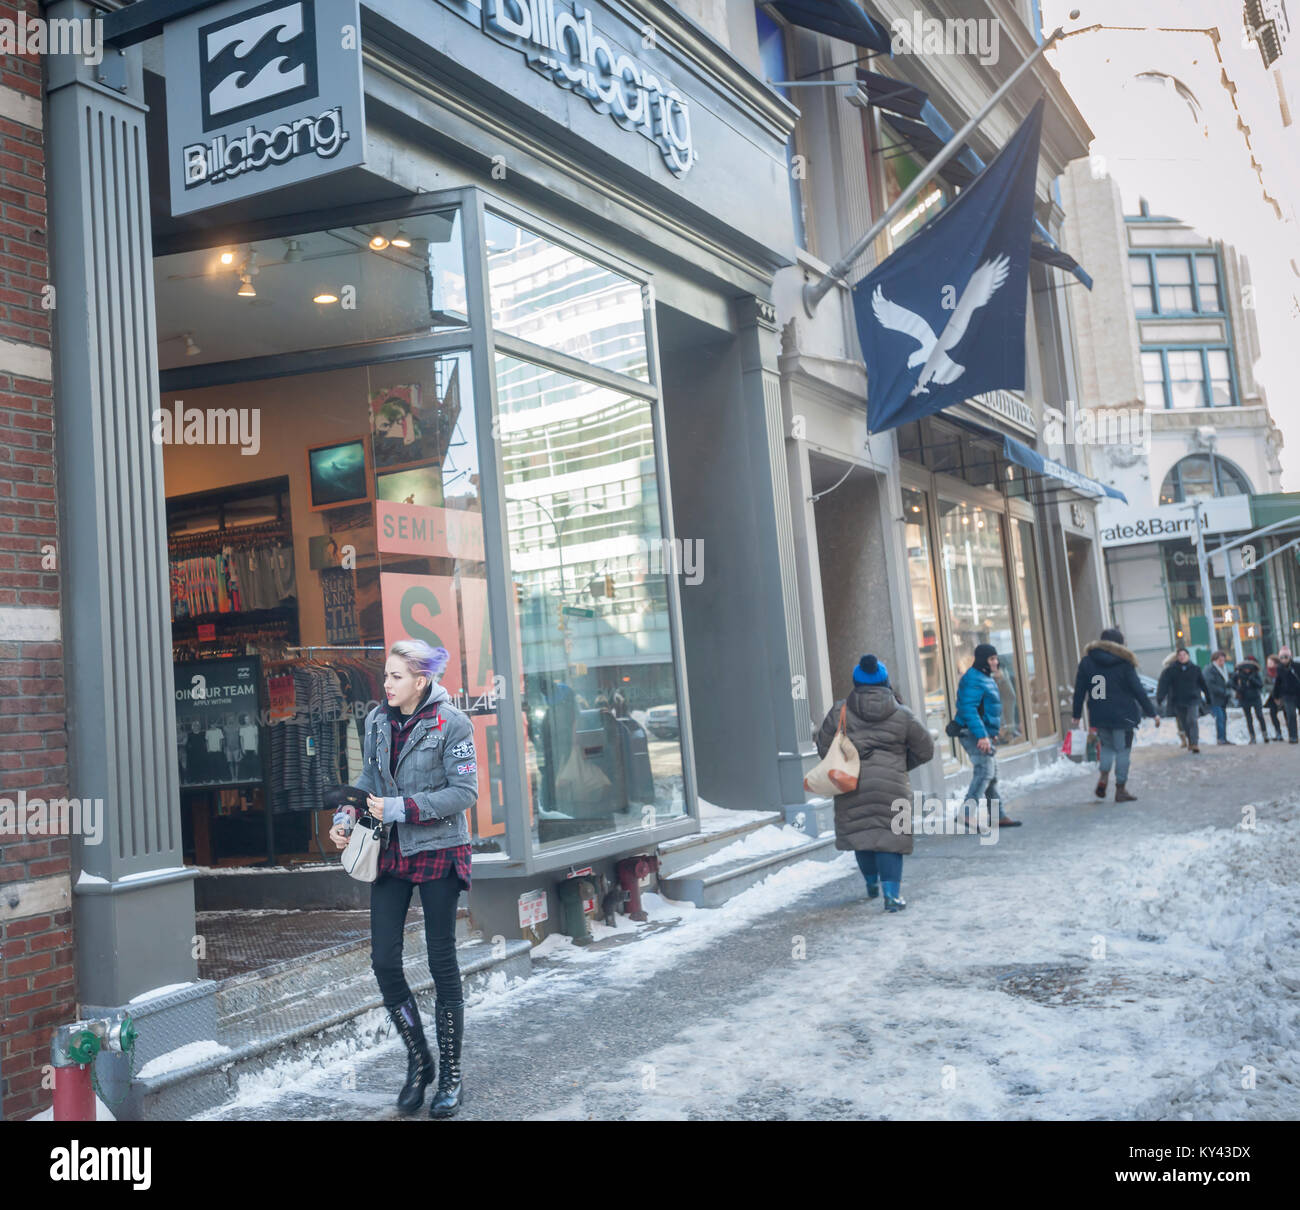 The Billabong store in Soho in New York on Friday, January 5, 2018 Stock  Photo - Alamy